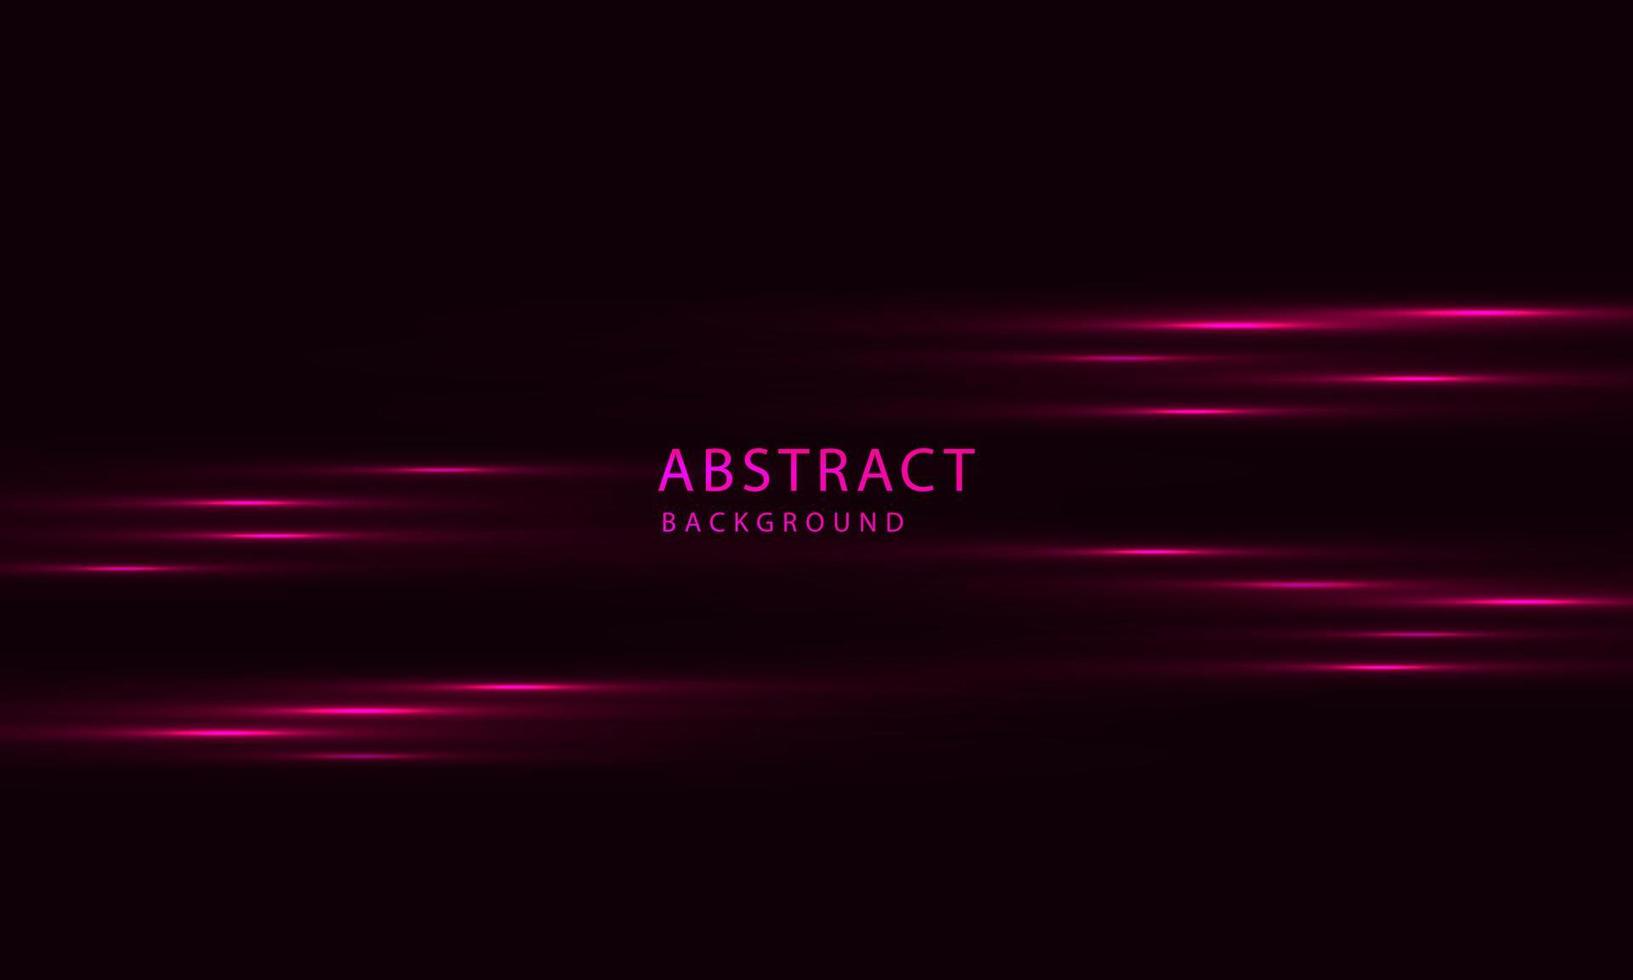 Futuristic Sci-Fi Abstract Pink Neon Light Shapes On Black Background. Exclusive wallpaper design for poster, brochure, presentation, website etc. vector